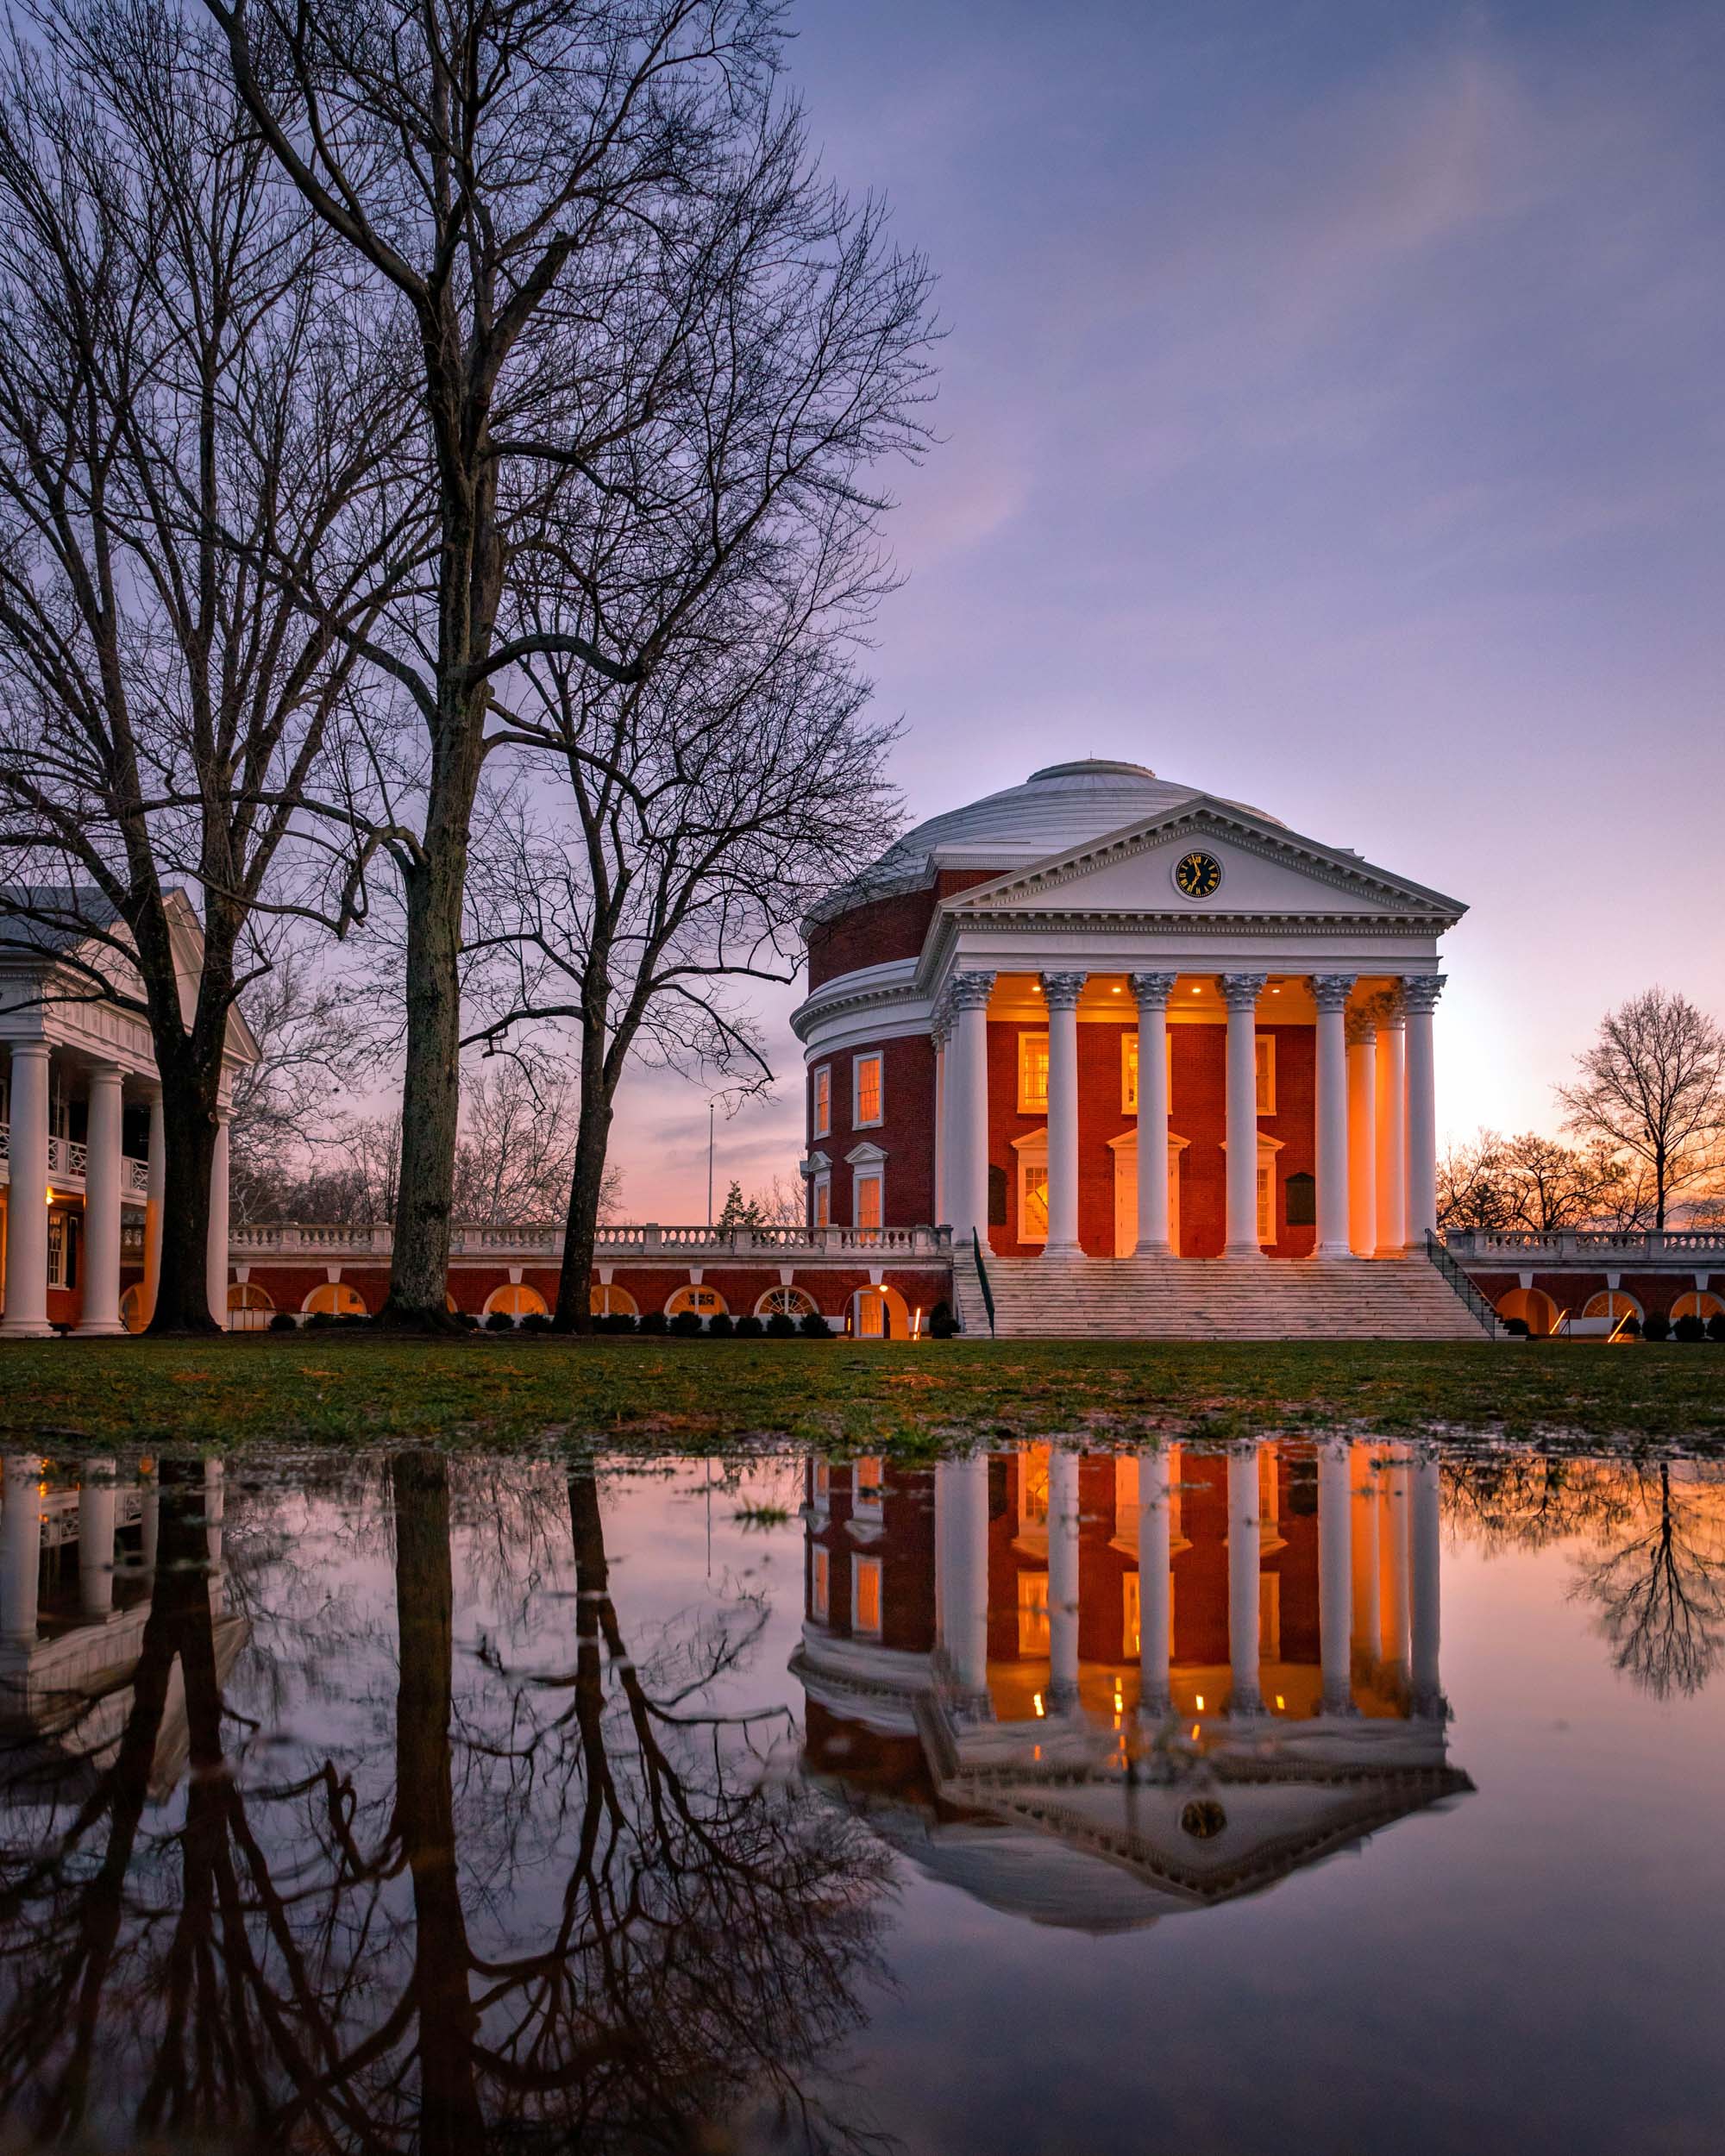 Water on the lawn reflects the Rotunda lit up at dawn